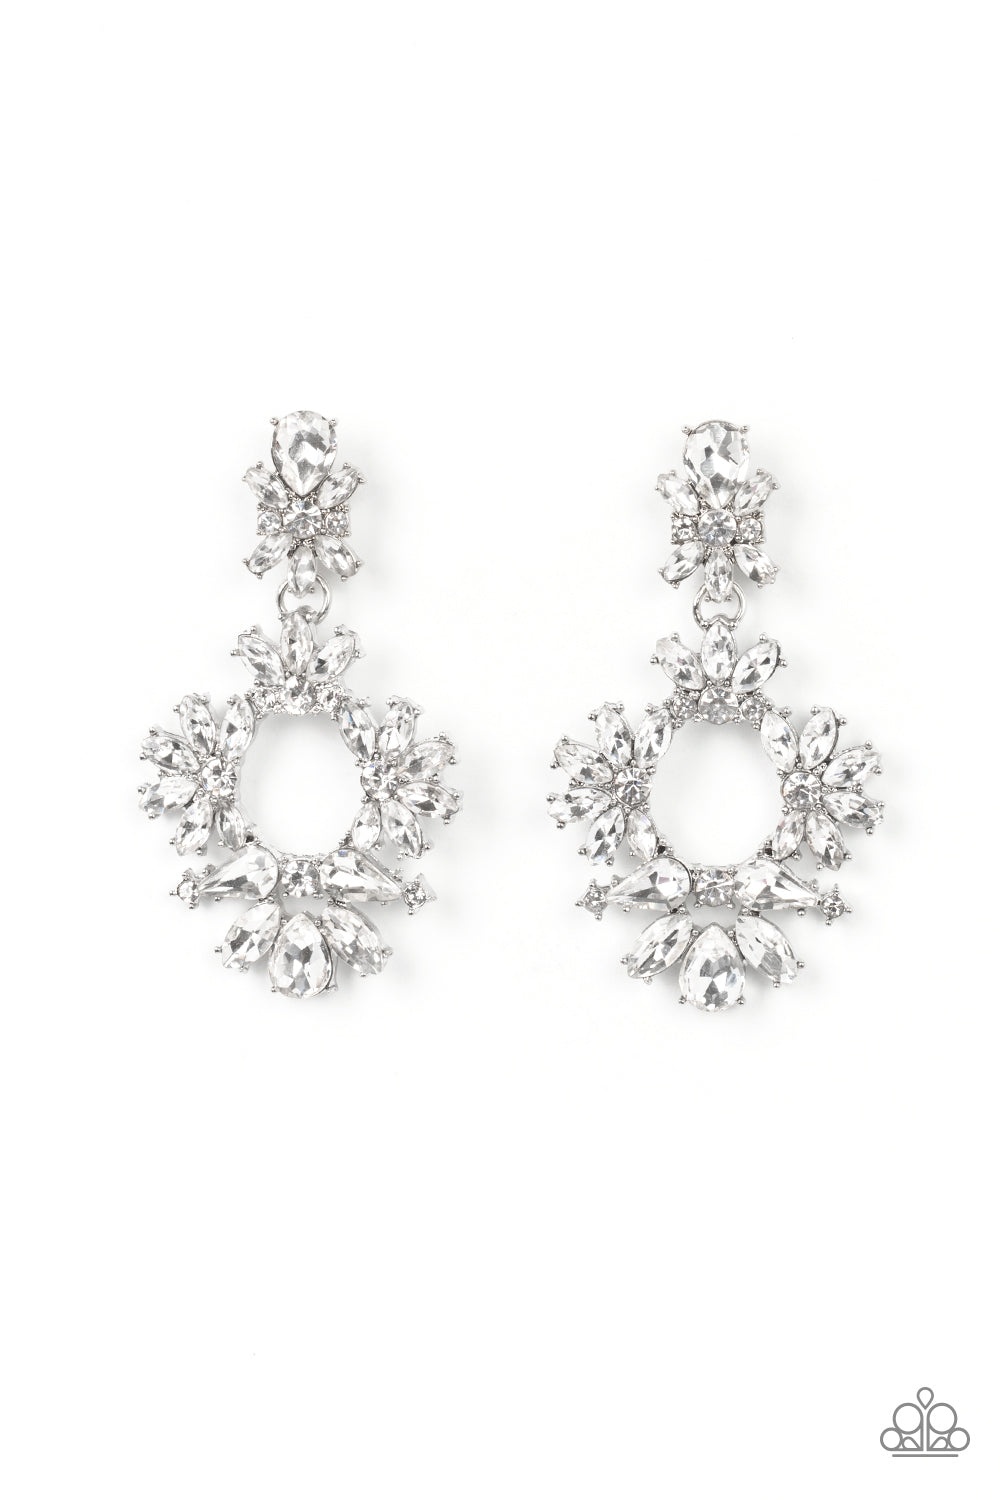 Leave them Speechless - White Earrings - Paparazzi Accessories